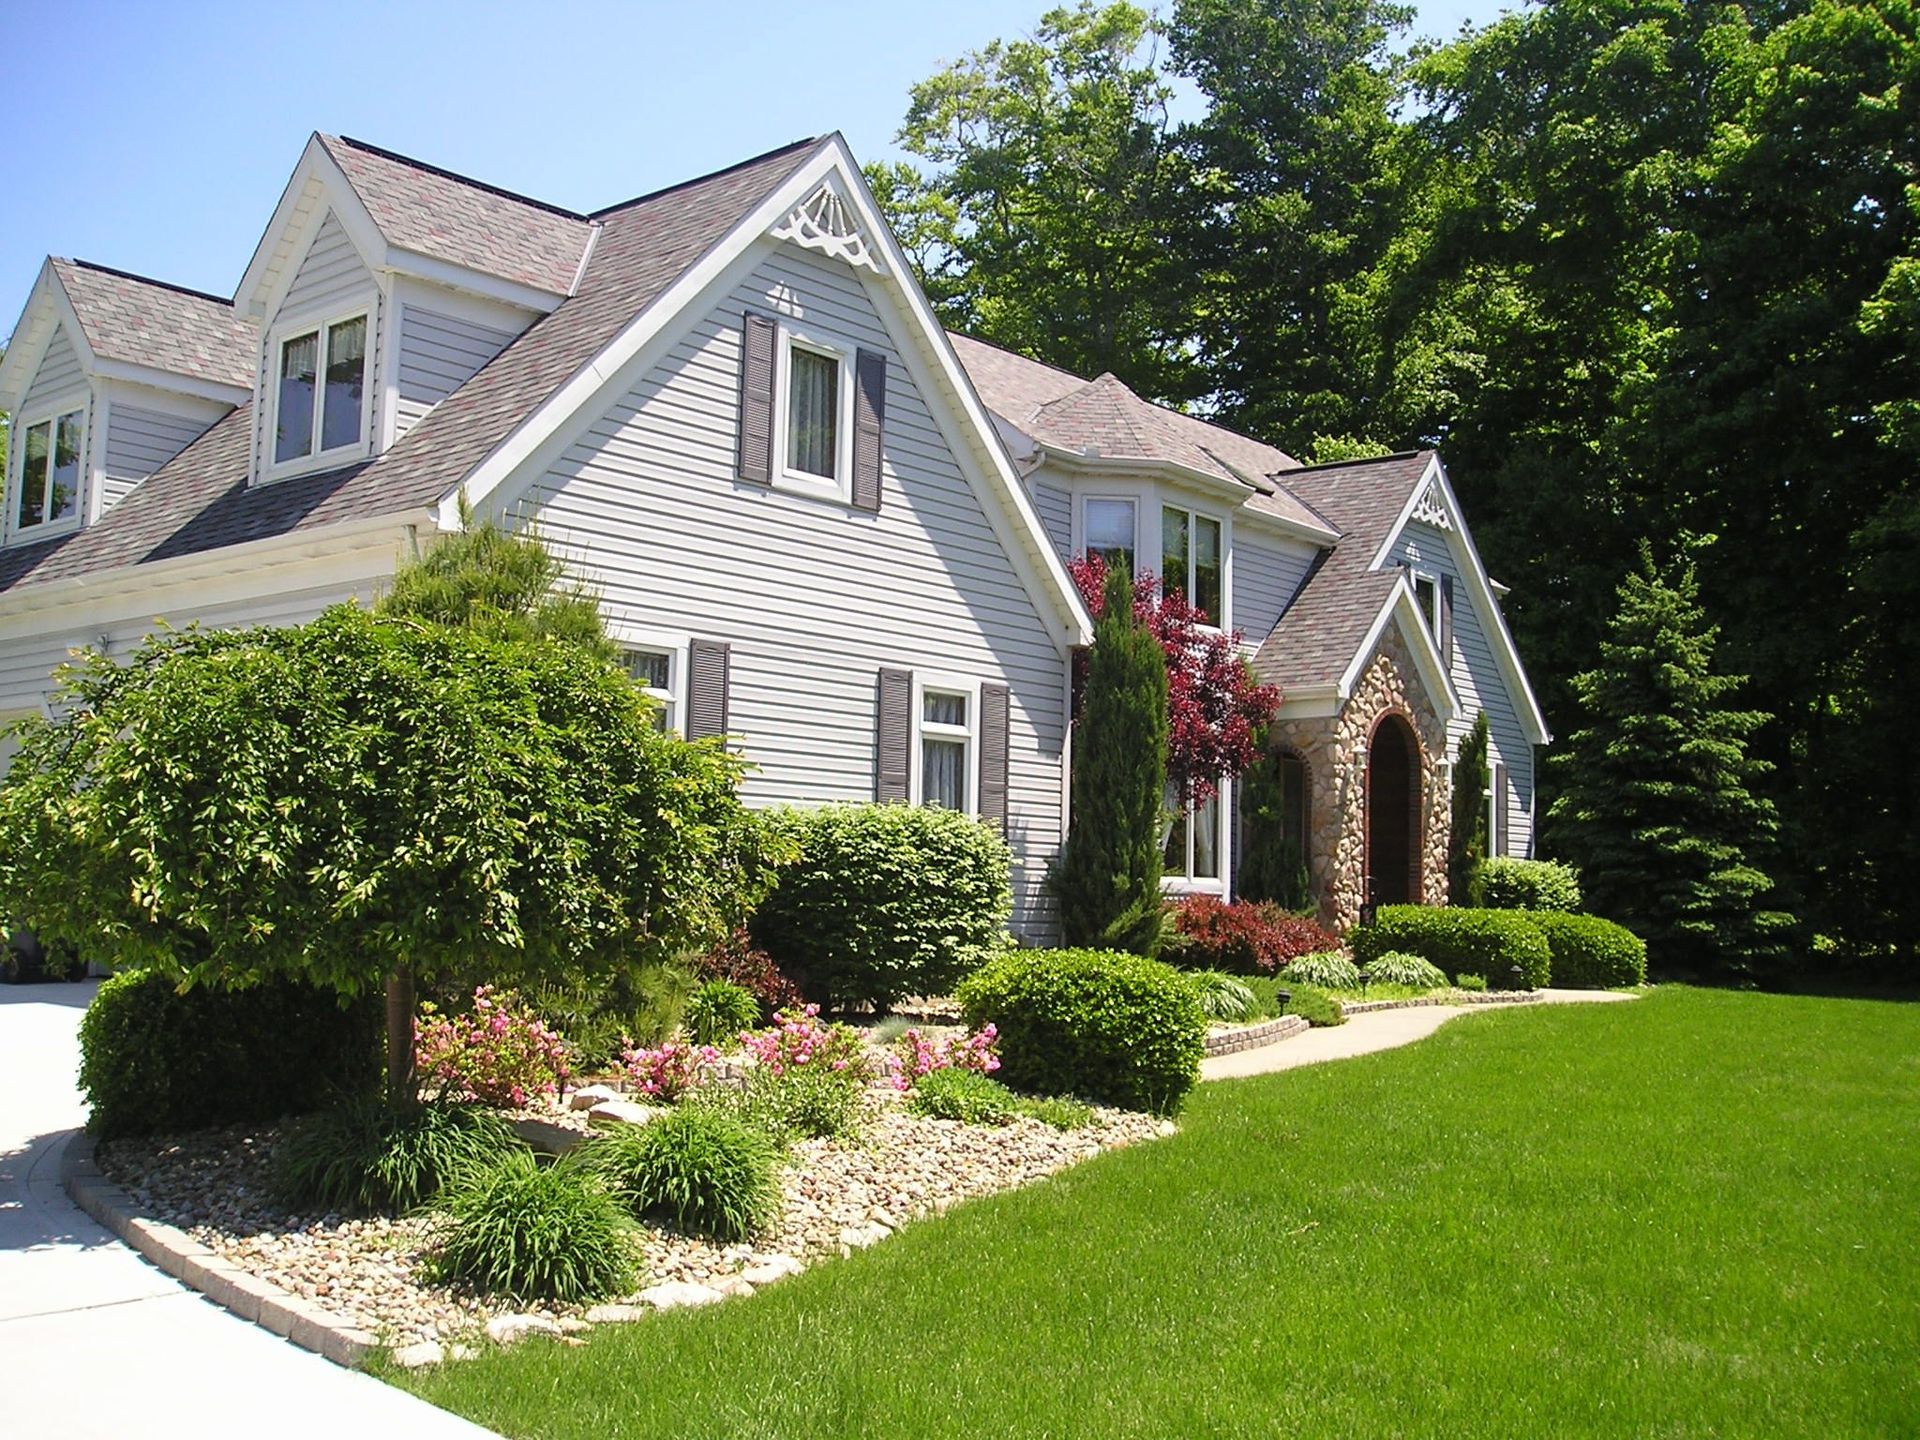 Strong curb appeal will help attract home buyers